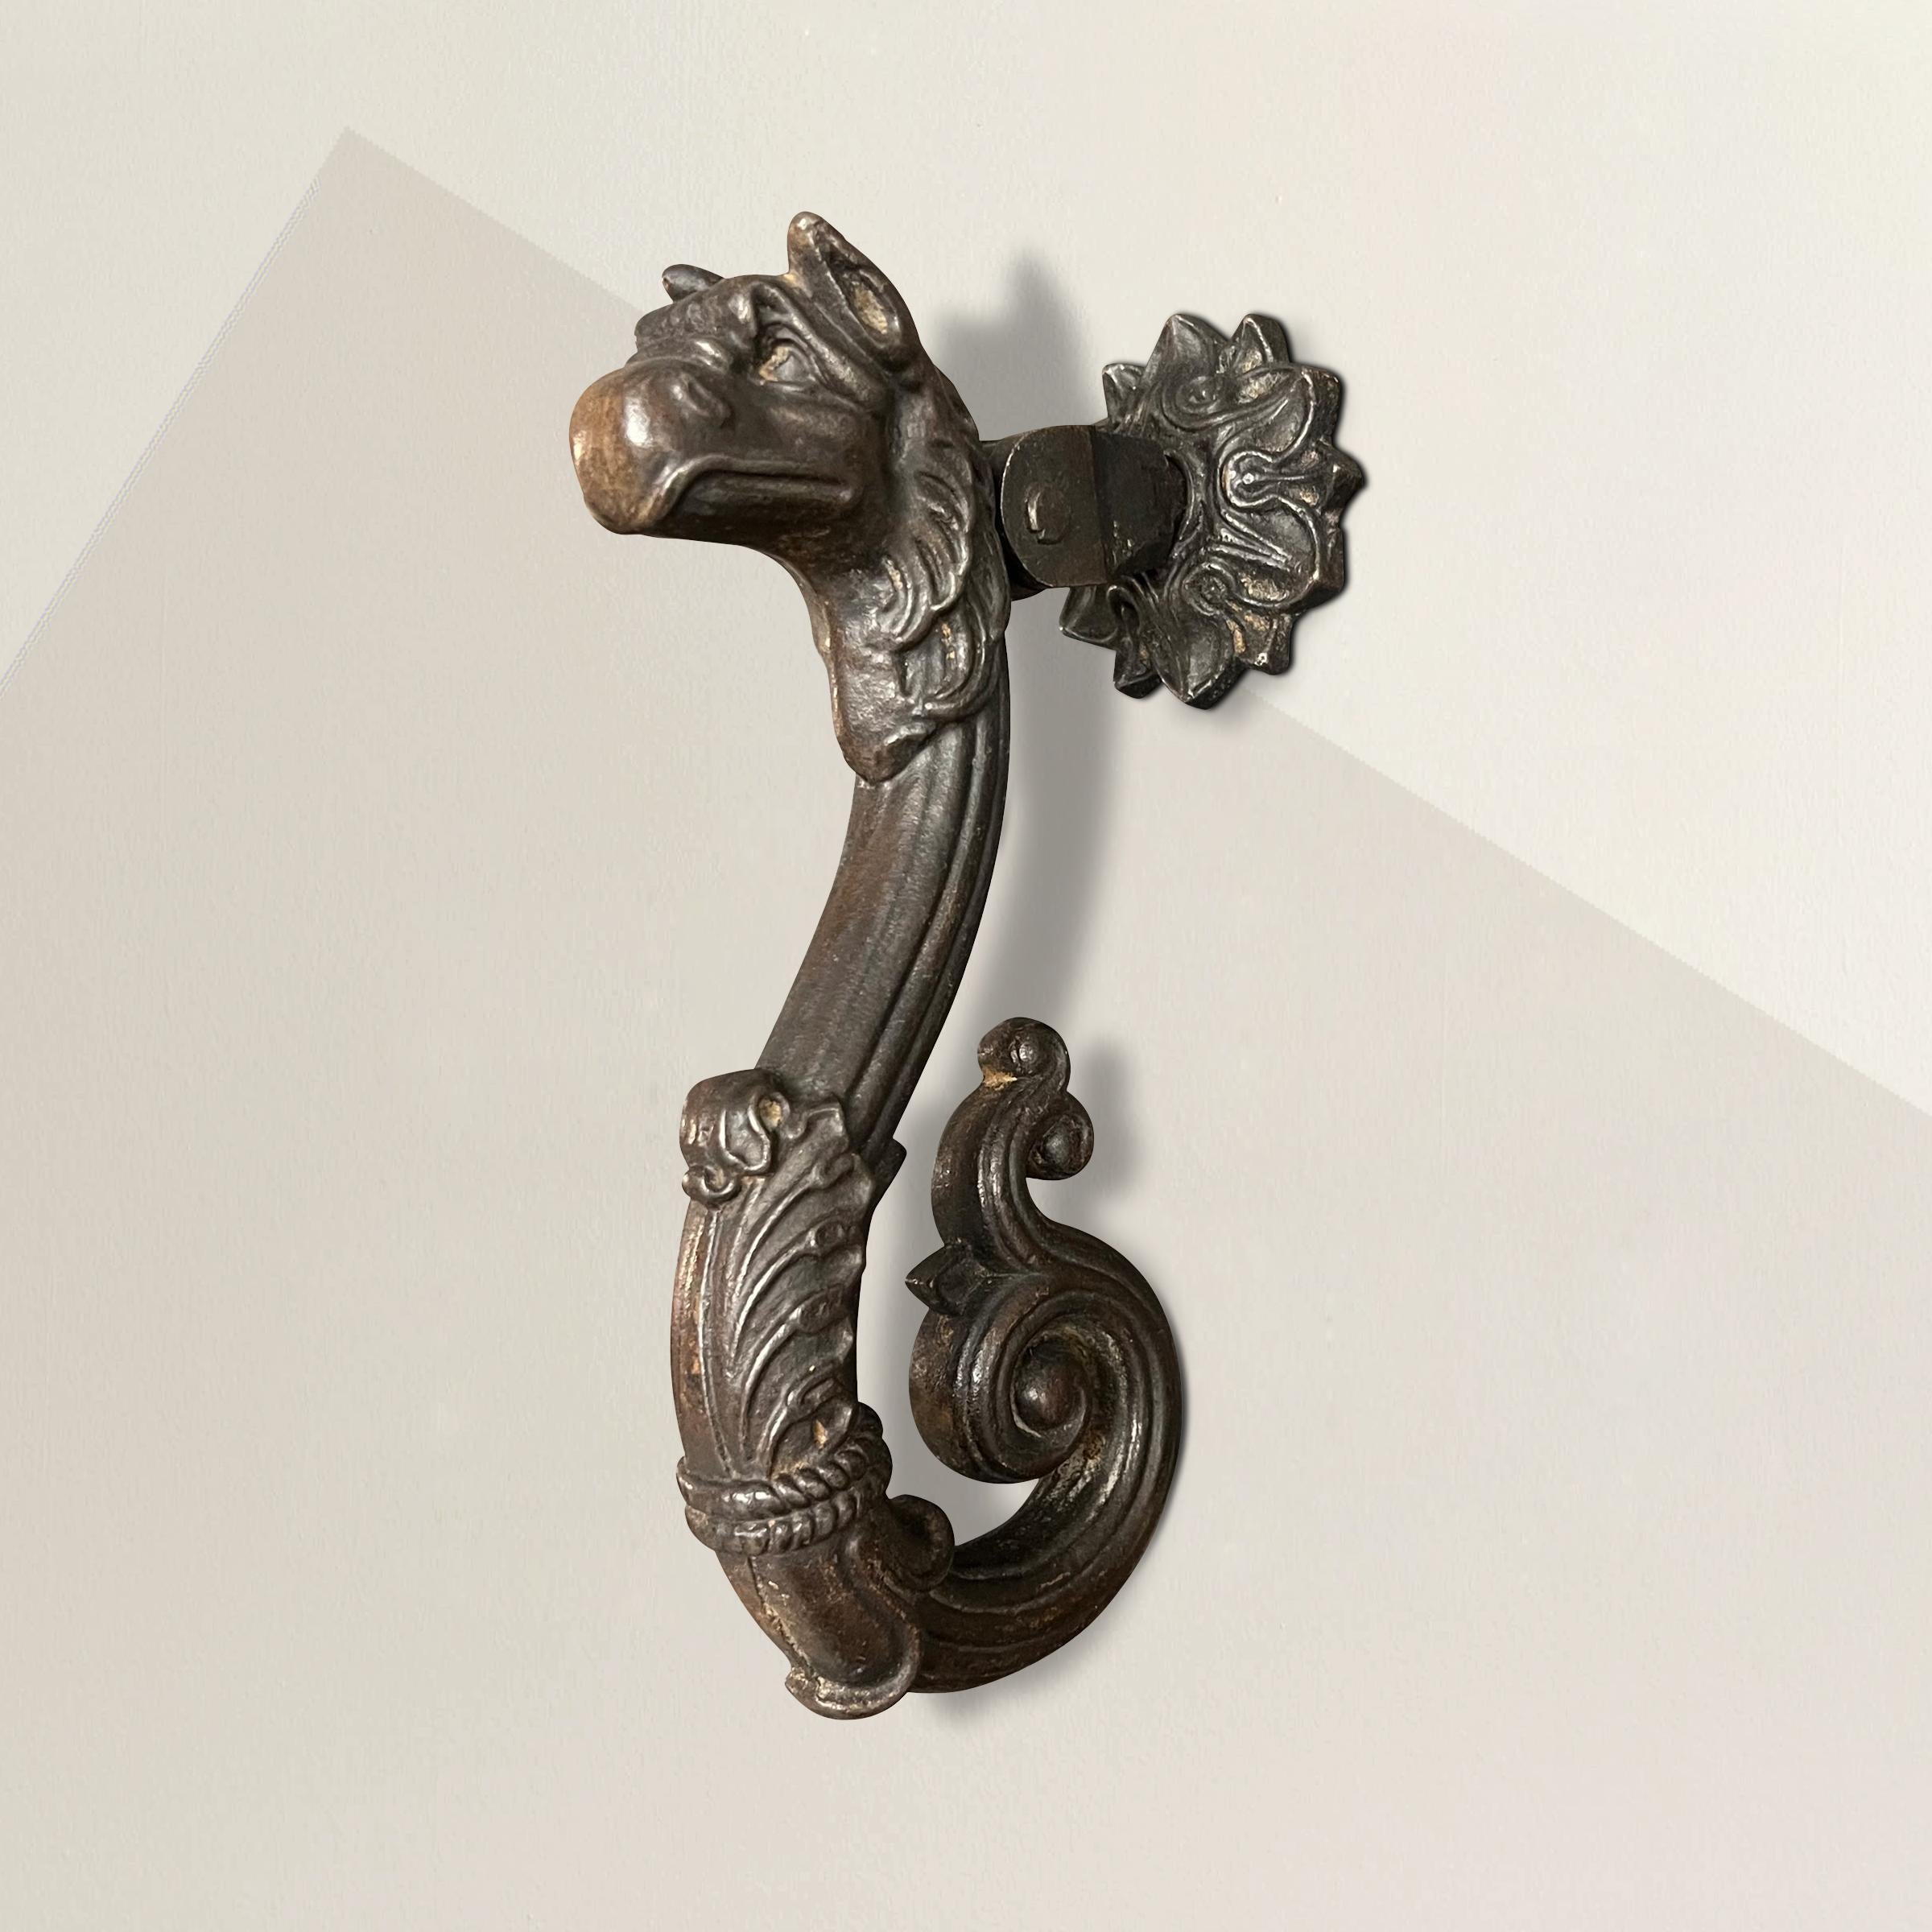 A stunning 19th century French cast bronze door knocker with a griffin head over a scrolled body with foliate details, and backed with a floral roundel backplate.